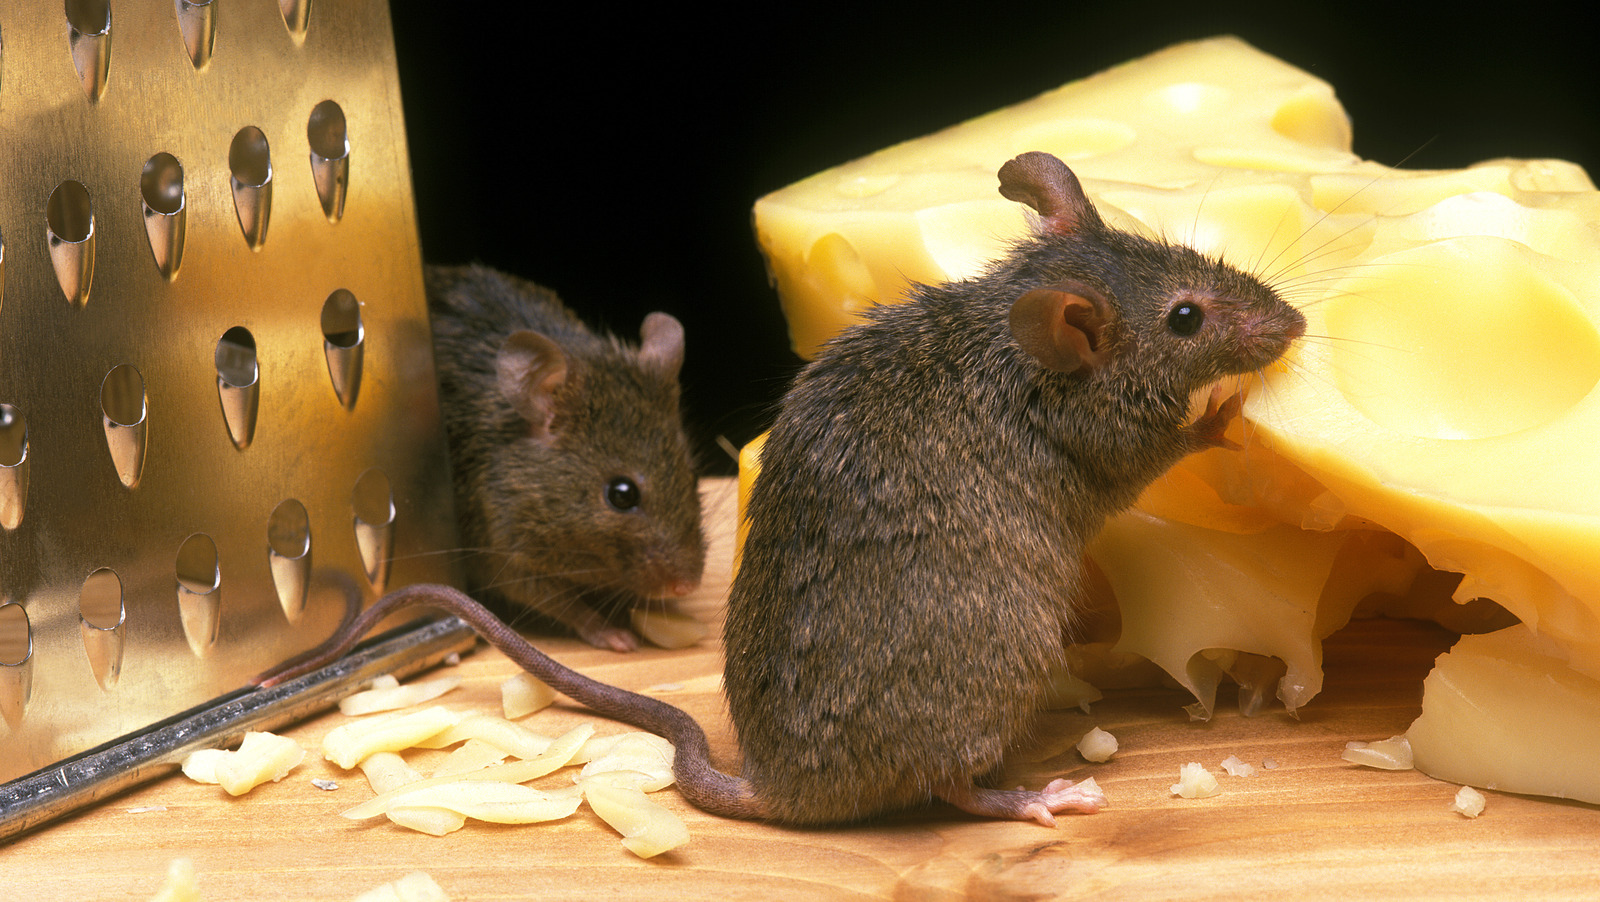 How to Get Rid of Mice Naturally: Repellents, Humane Traps, and Other Tips